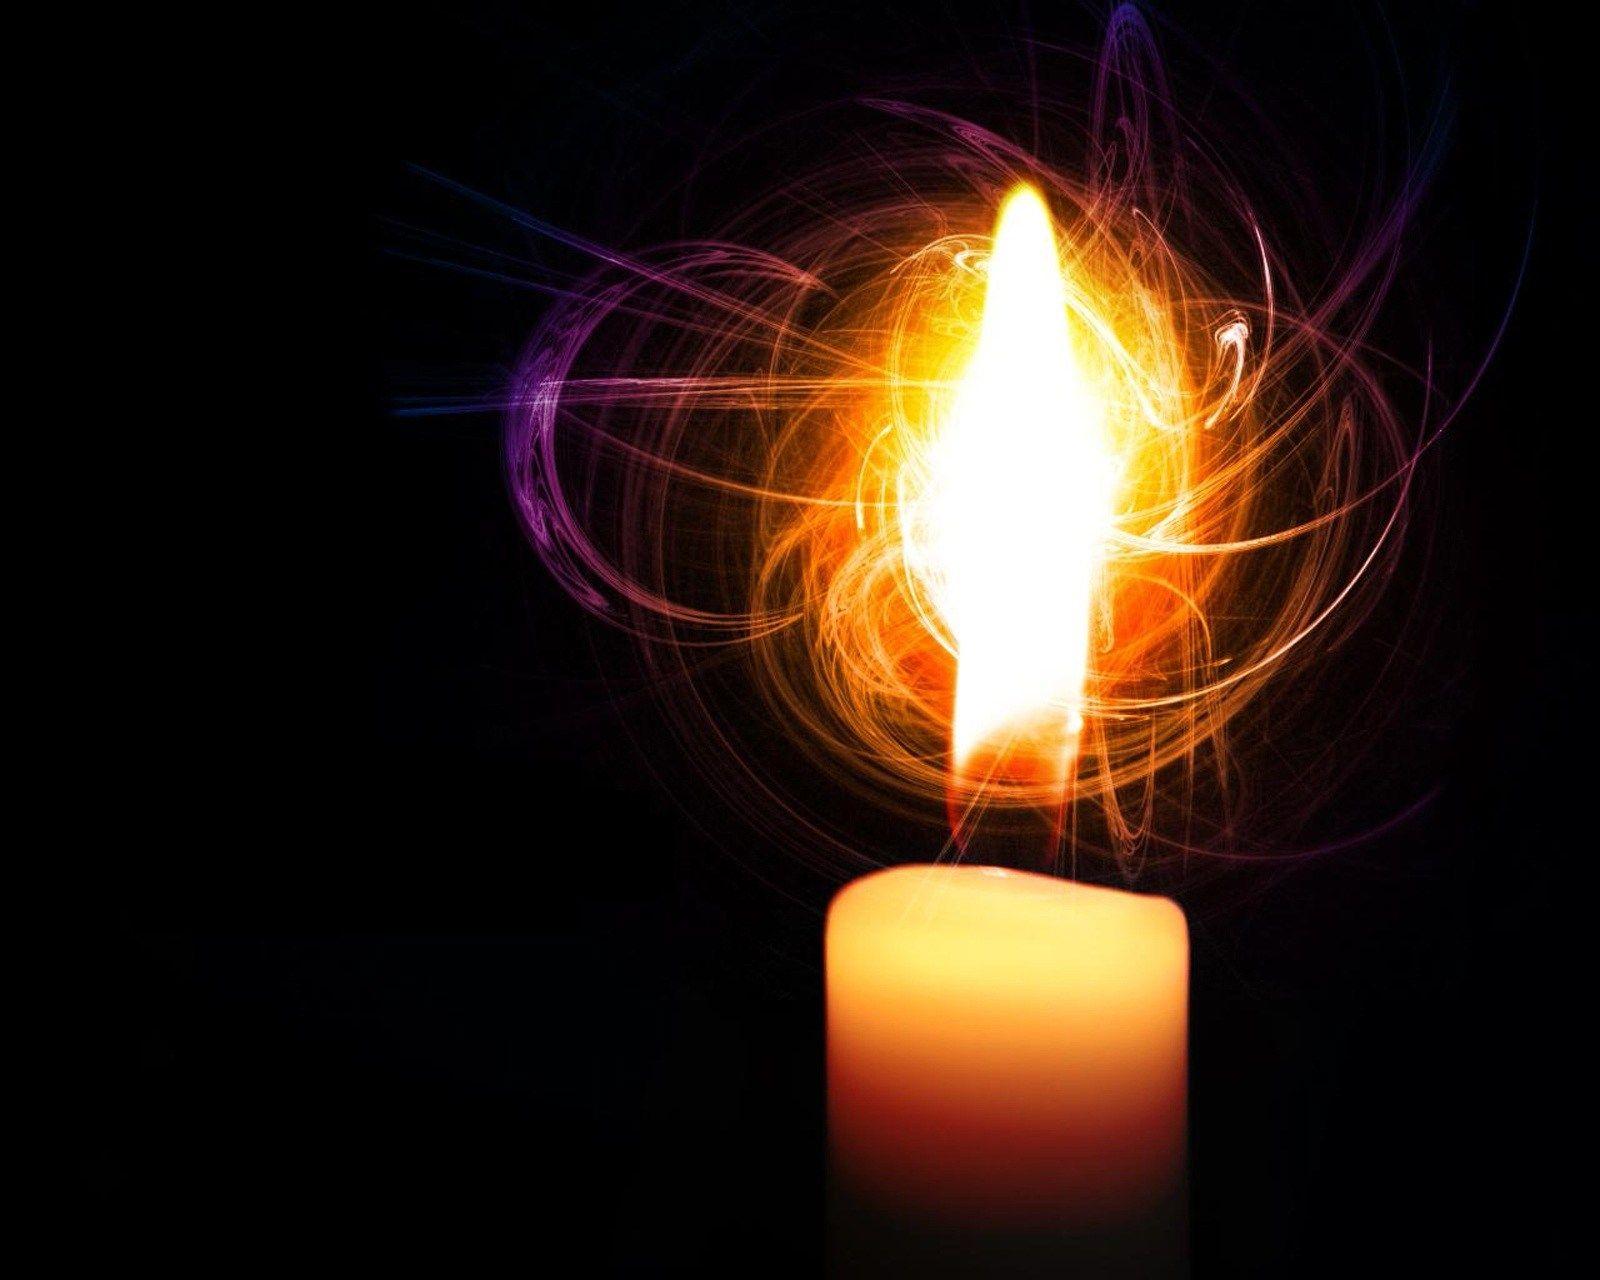 Abstract candle light wallpaper